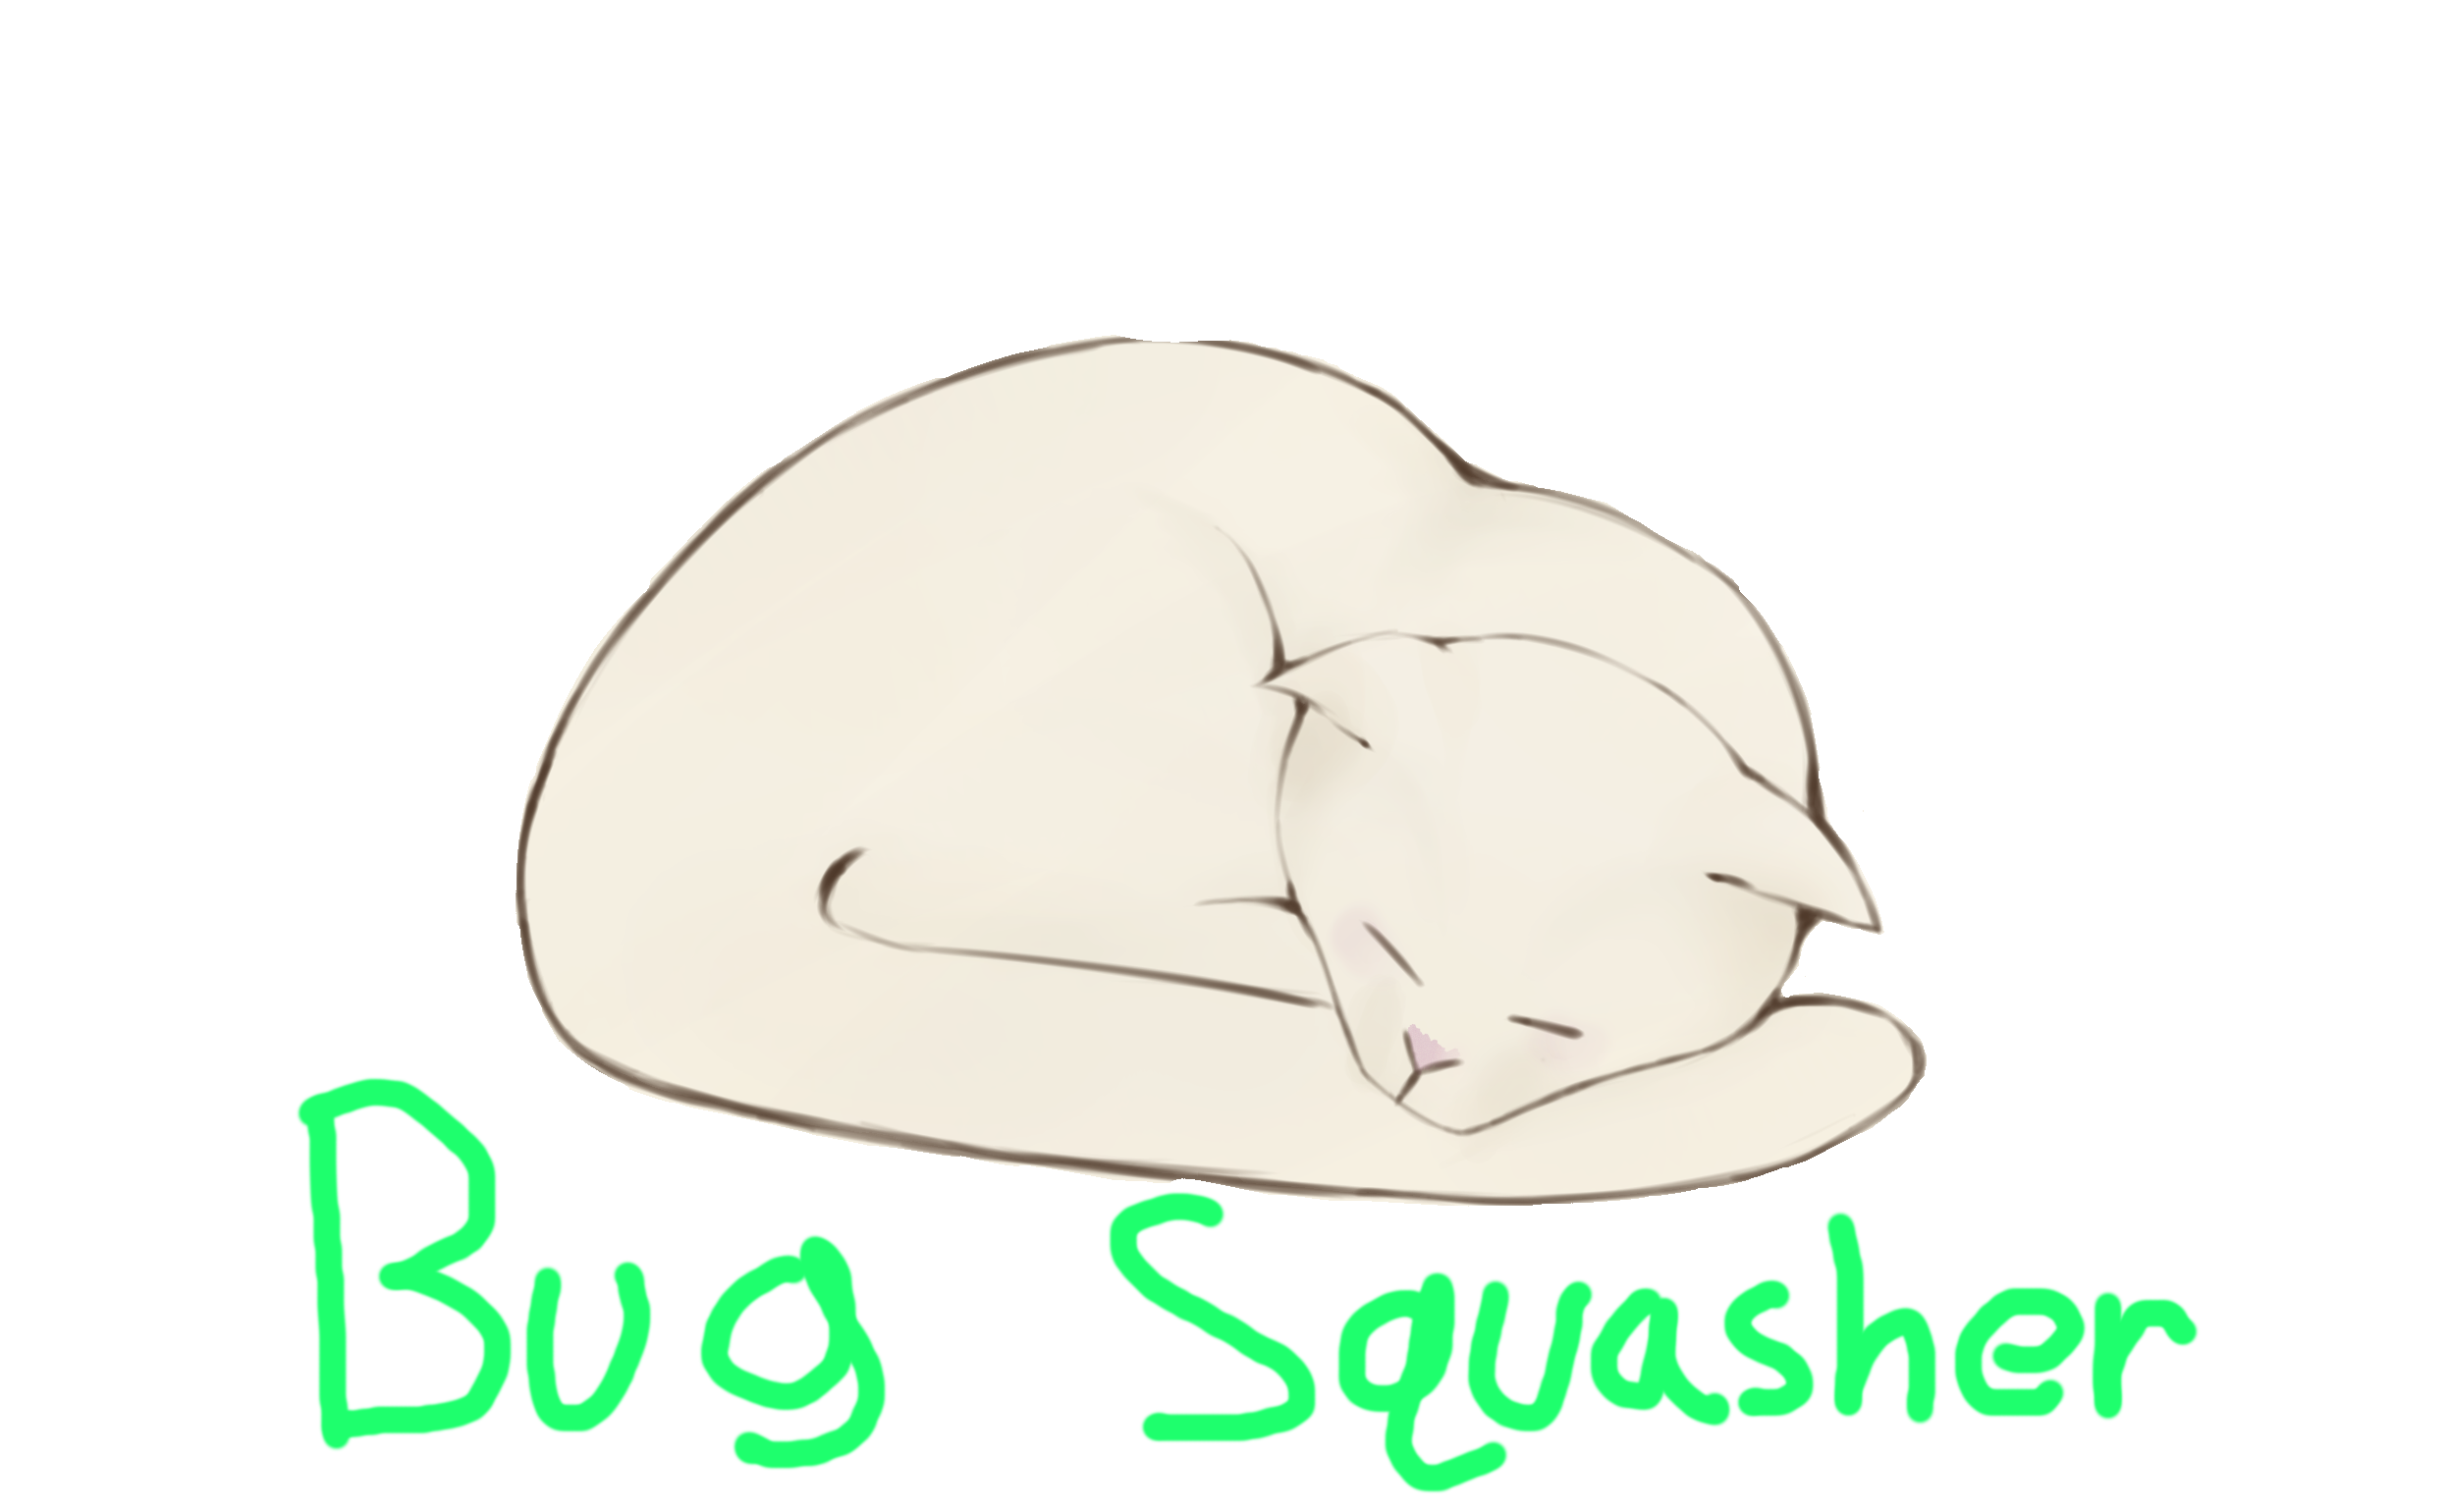 Coots: Bug Squasher